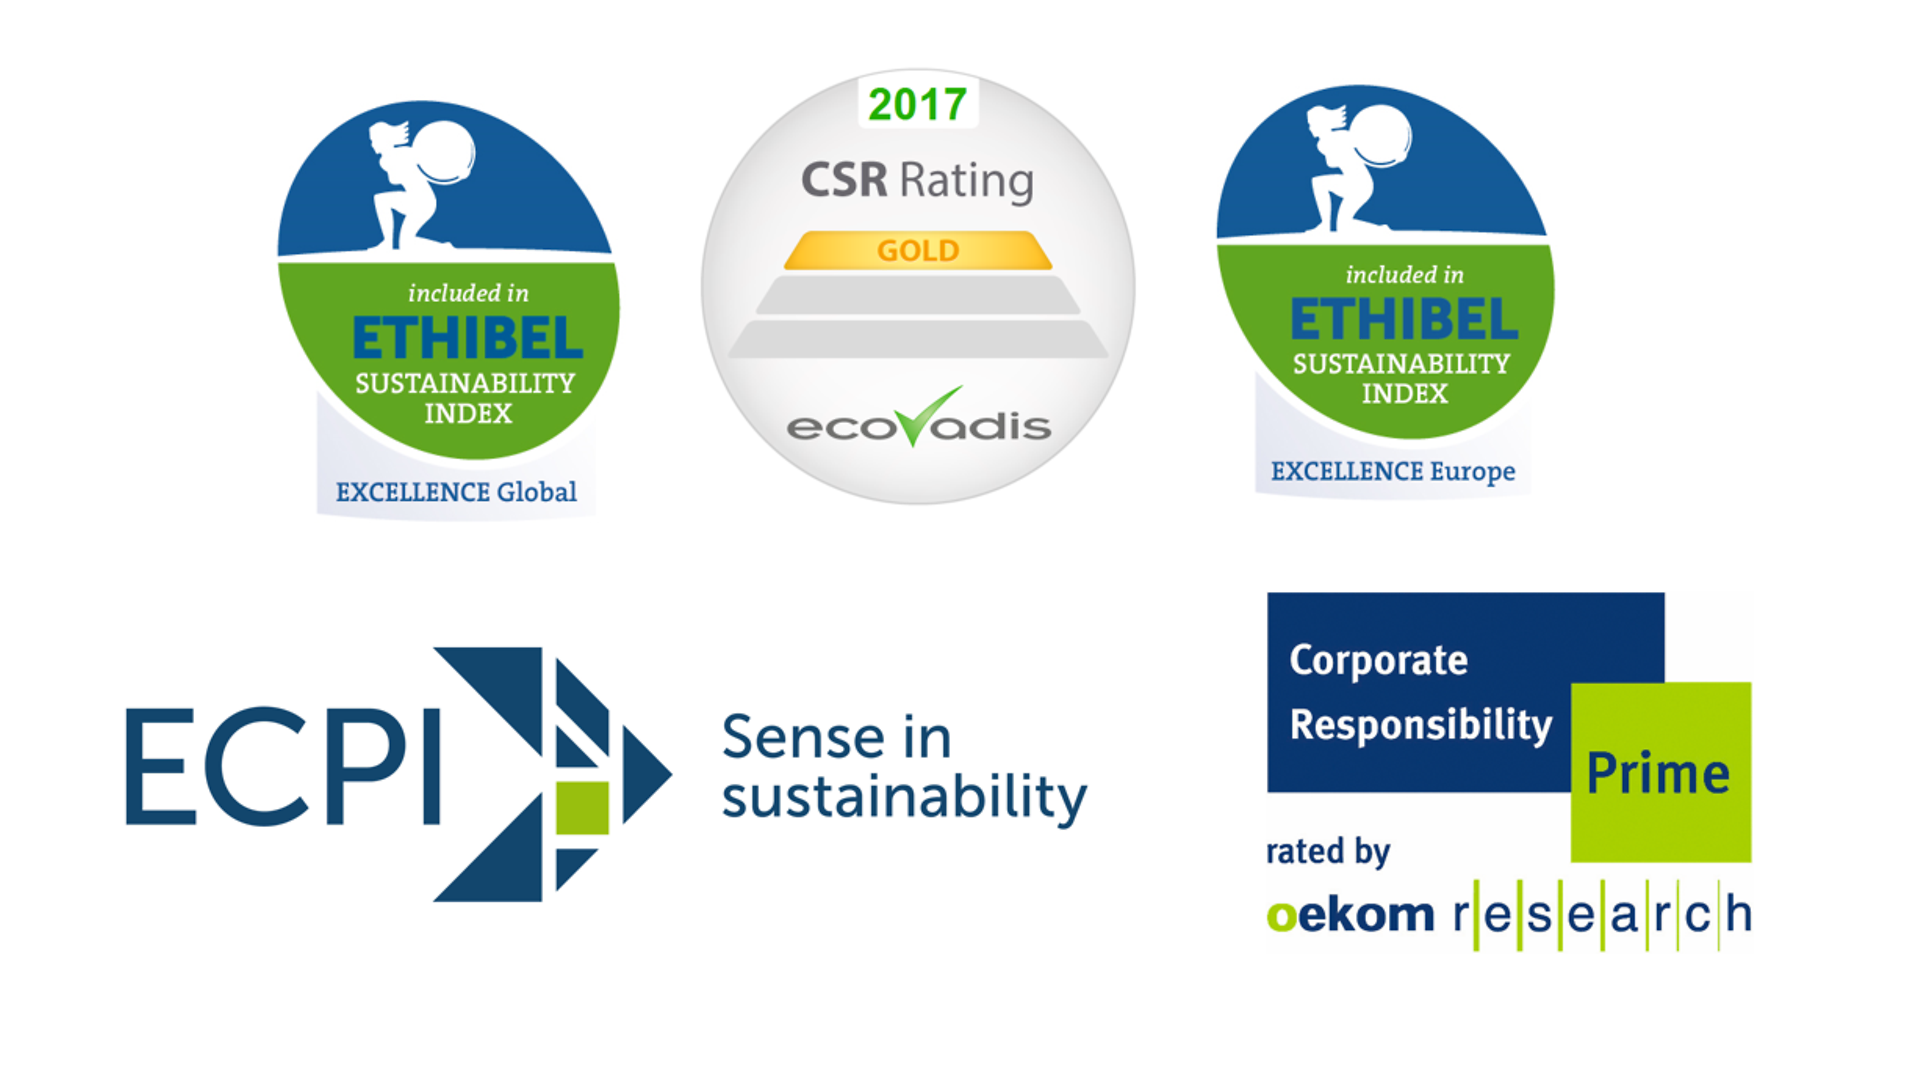 Recognition of Henkel’s sustainability performance by international ratings and indices